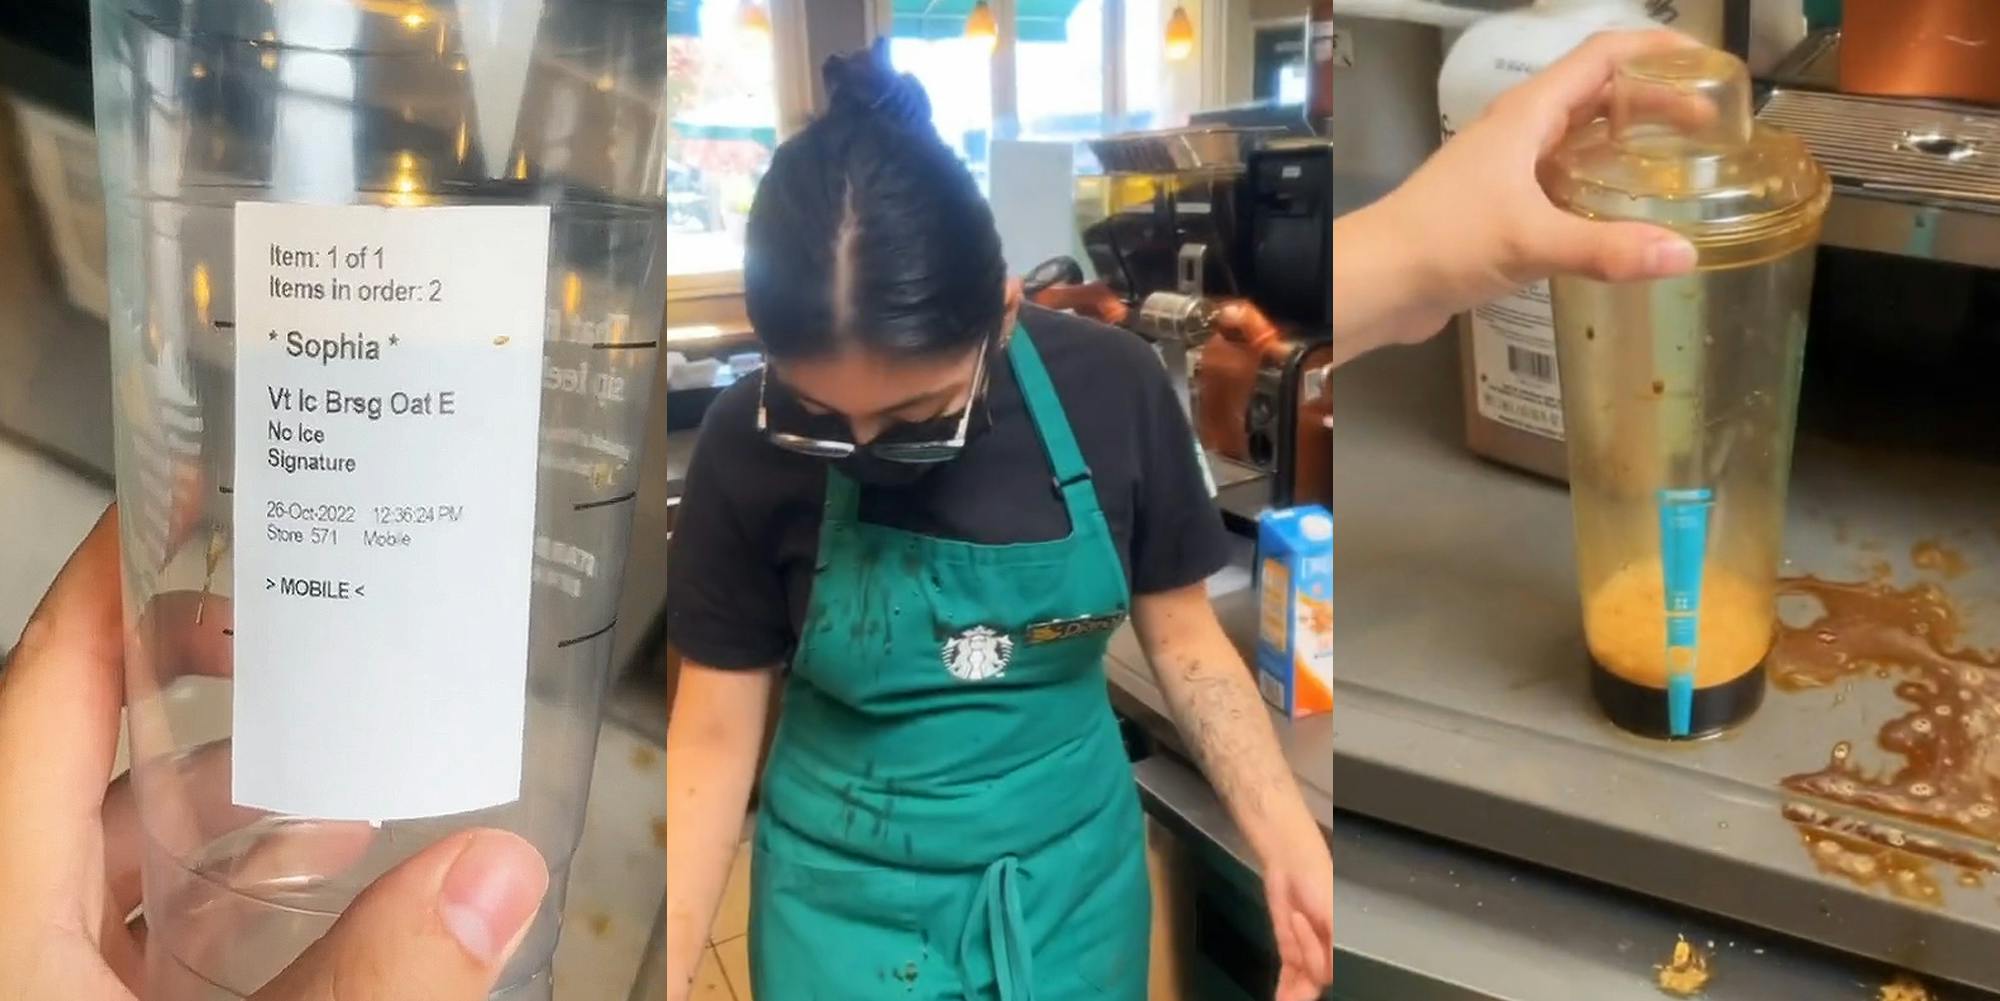 Starbucks order label on clear cup "Vt Ic Brsg Oat E. No Ice Signature" (l) Starbucks barista covered in espresso (c) Starbucks barista with hand on coffee shaker with coffee spilled on counter (r)